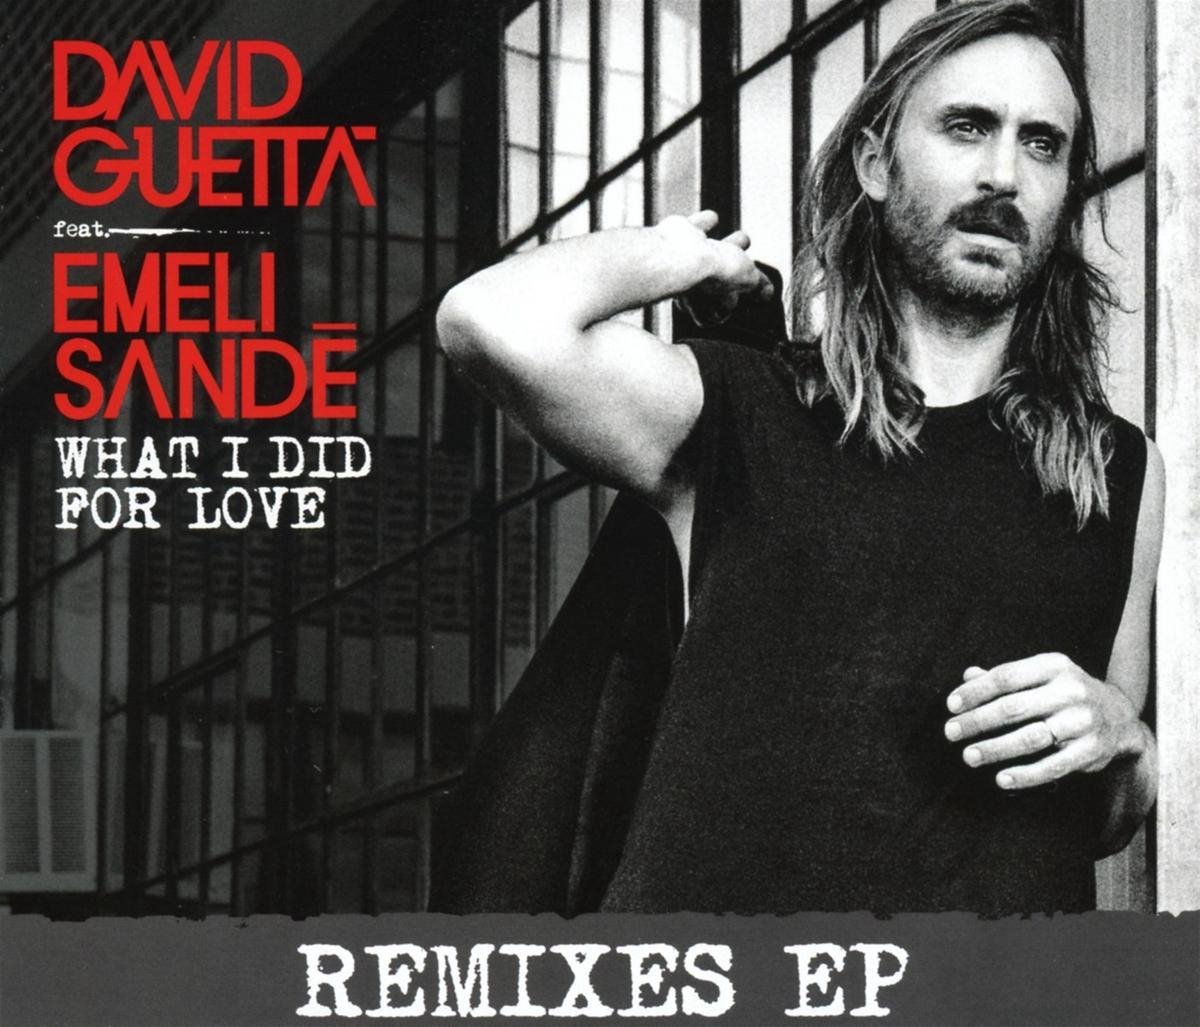 What I Did For Love (Remixes EP) (Feat. Emeli Sande) - Guetta,david